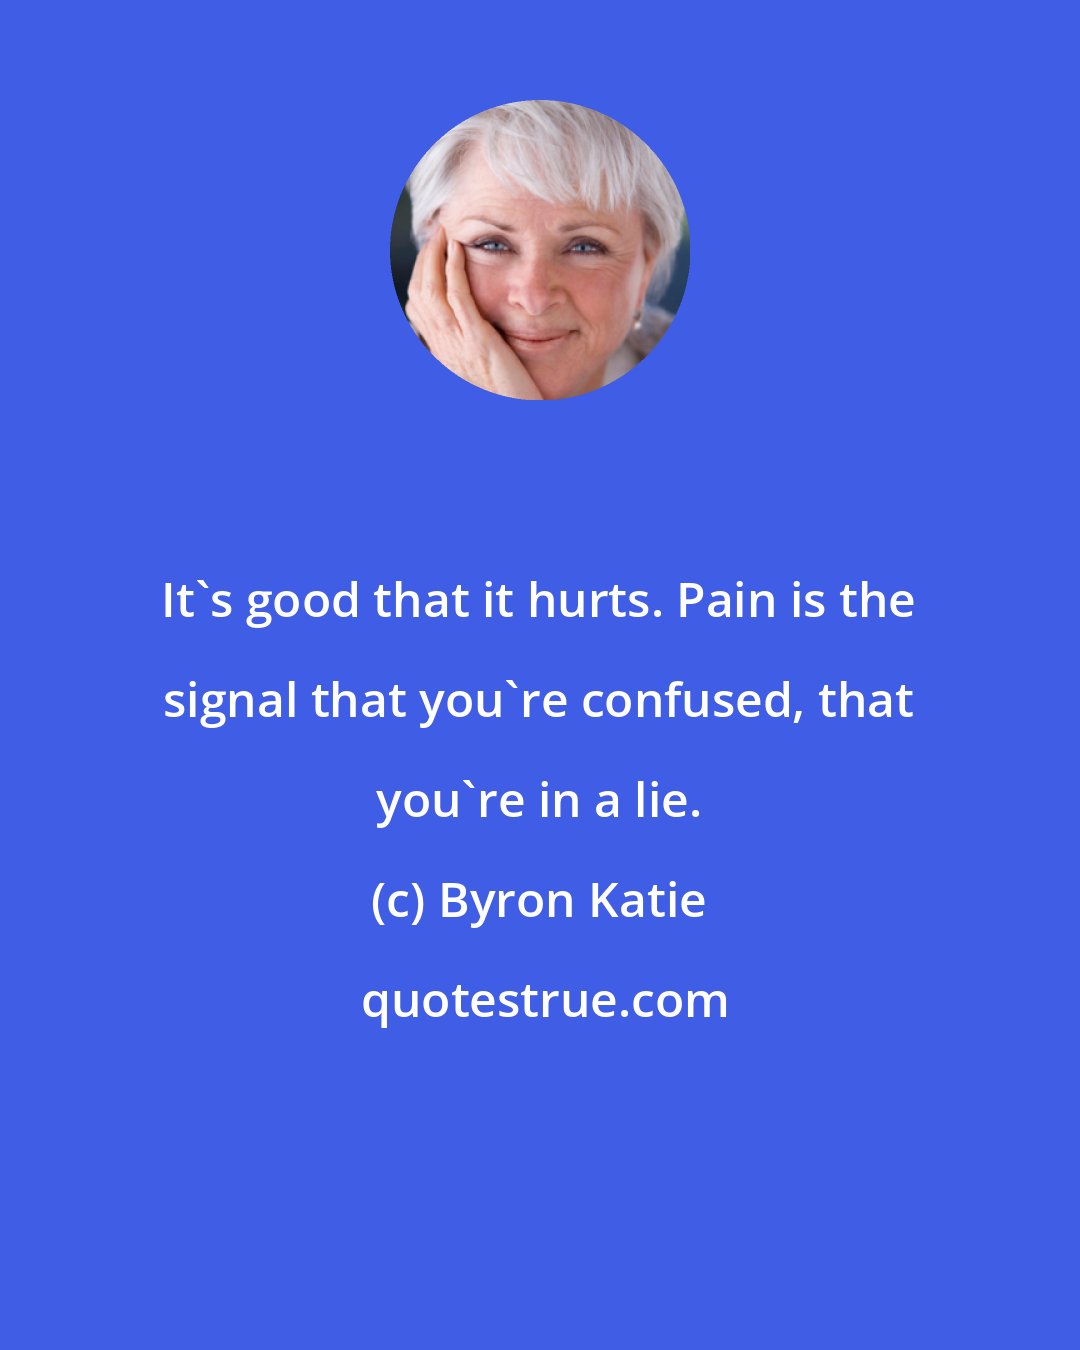 Byron Katie: It's good that it hurts. Pain is the signal that you're confused, that you're in a lie.